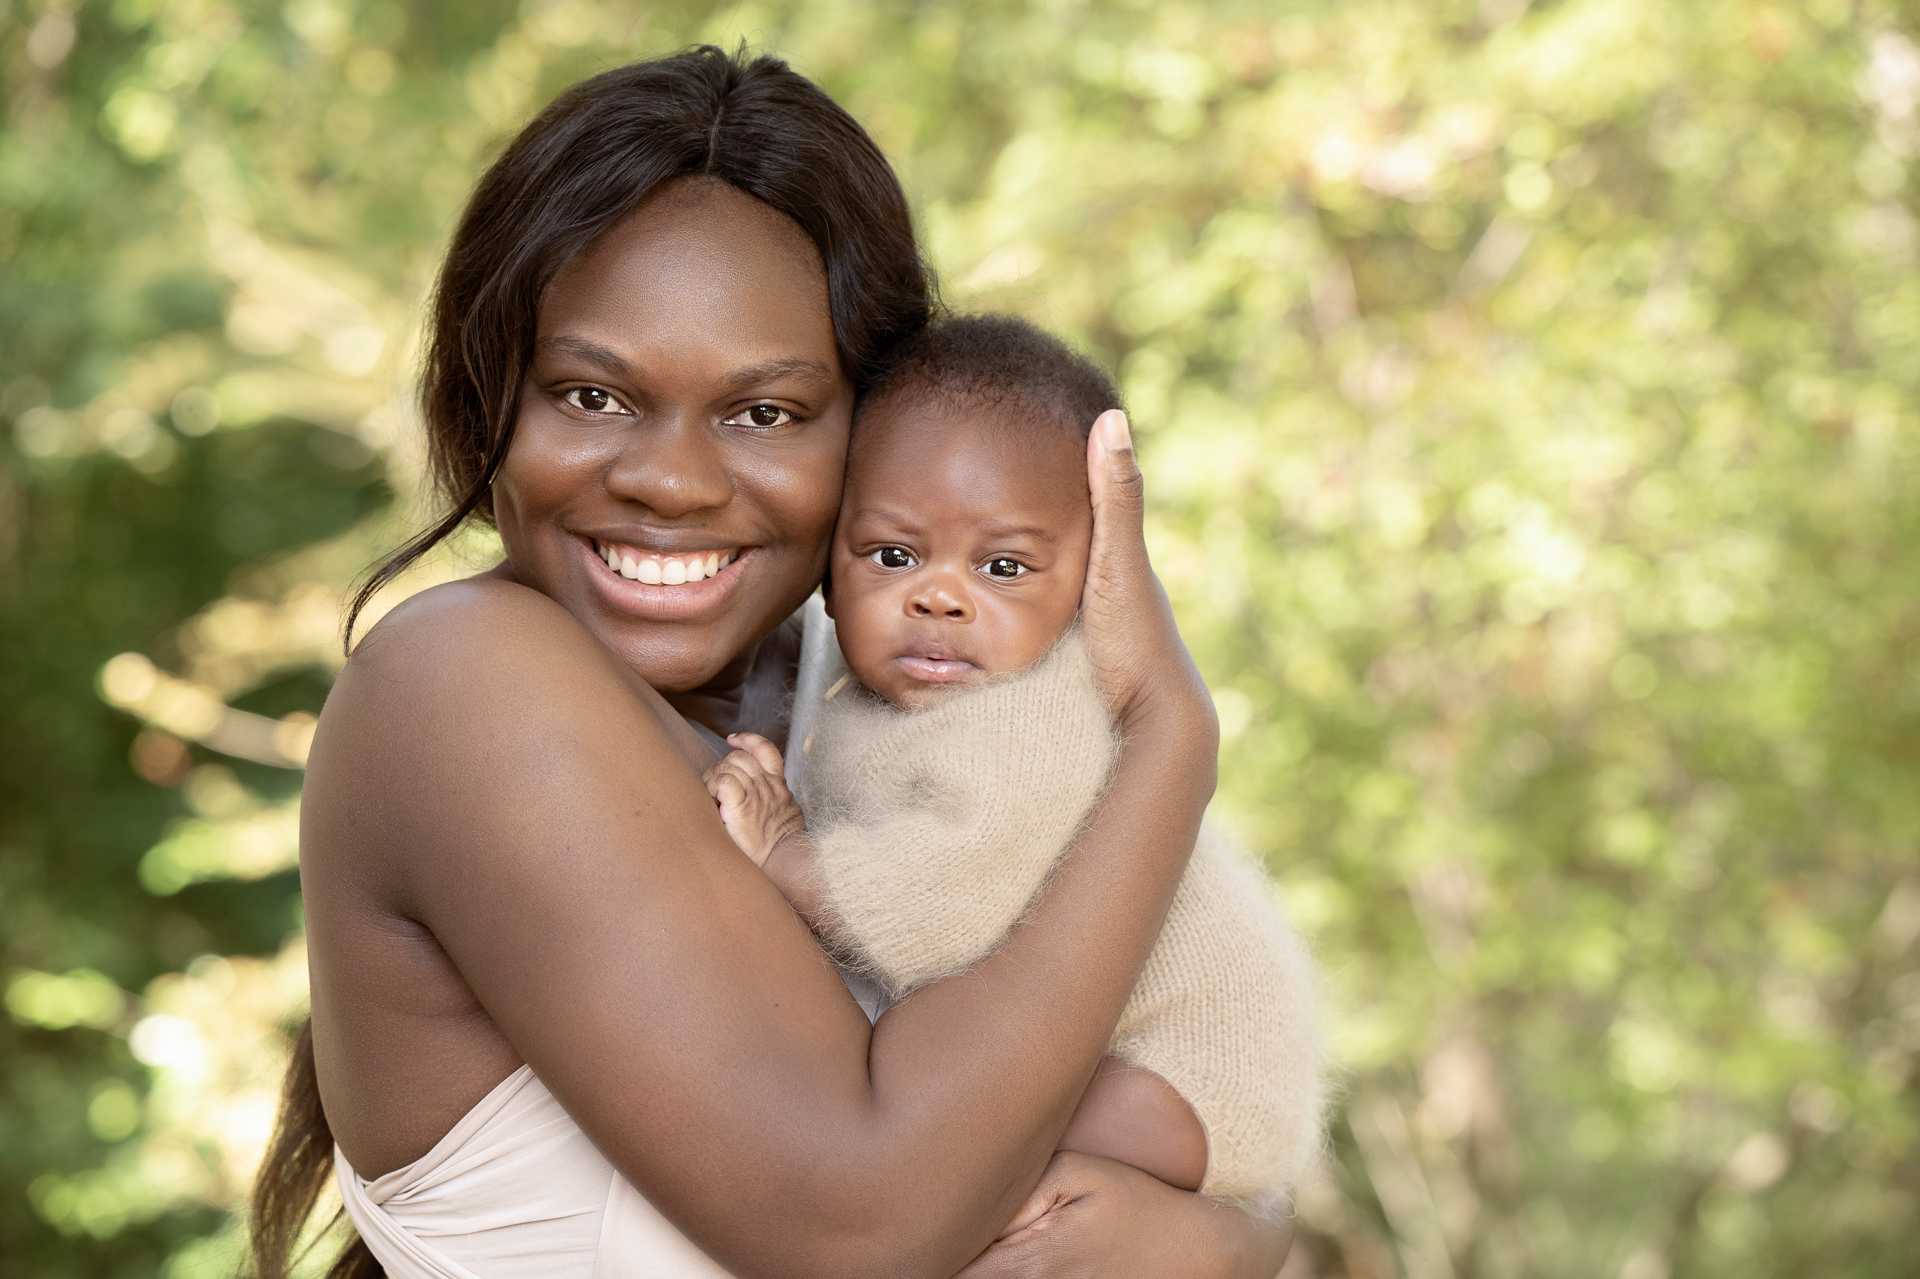 Mother posing outdoors with her newborn son. Both on light brown outfits.